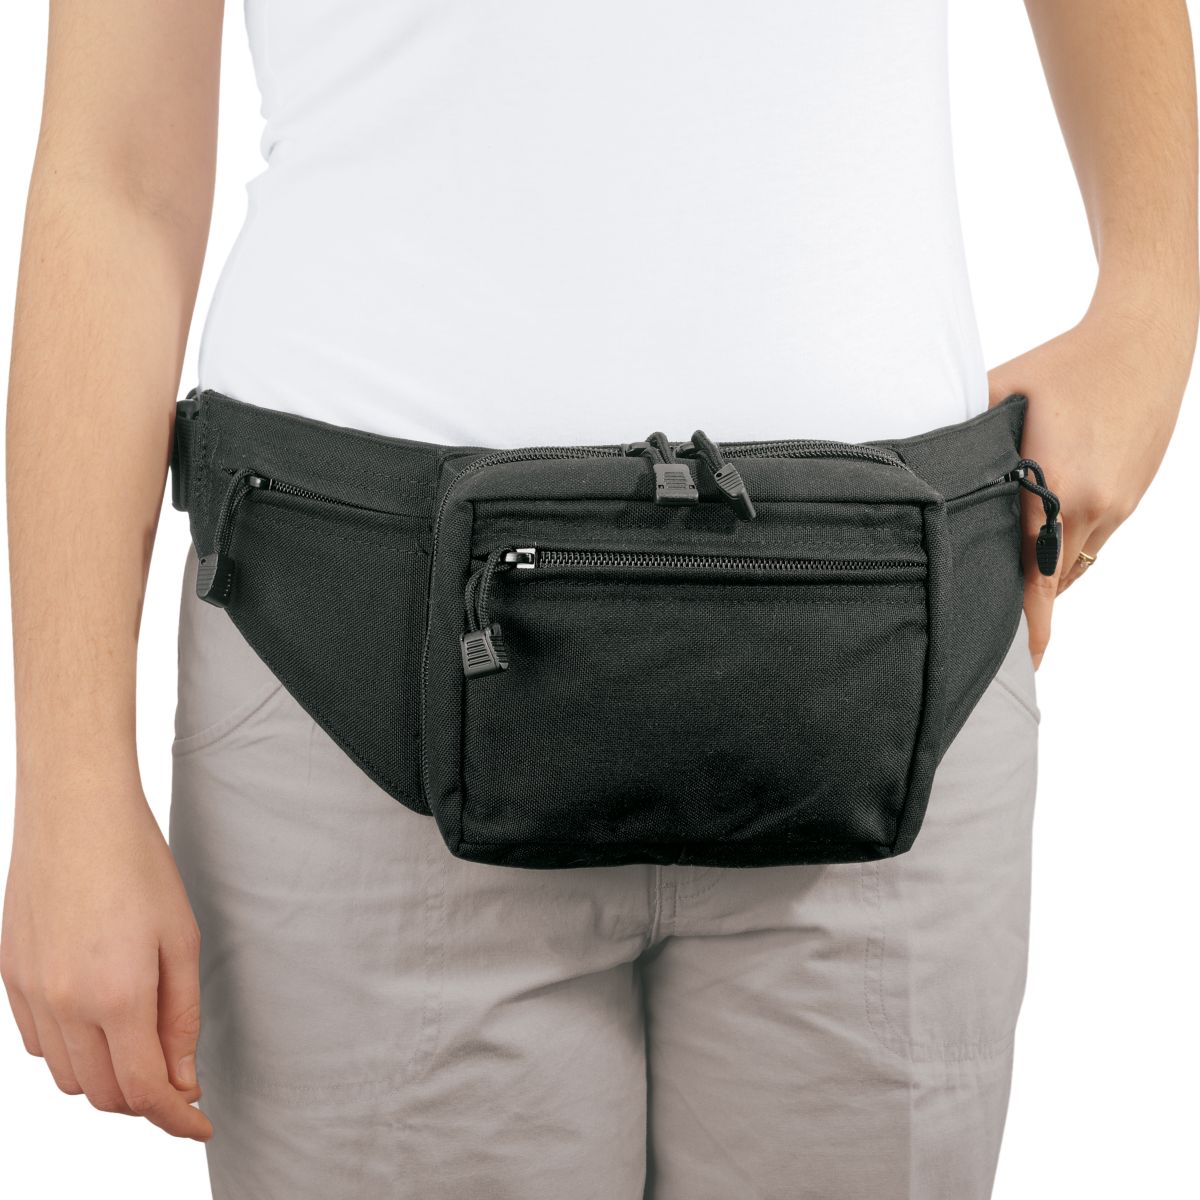 BLACKHAWK! Concealed-Carry Fanny Pack Small - $35.90 (Free Shipping ...